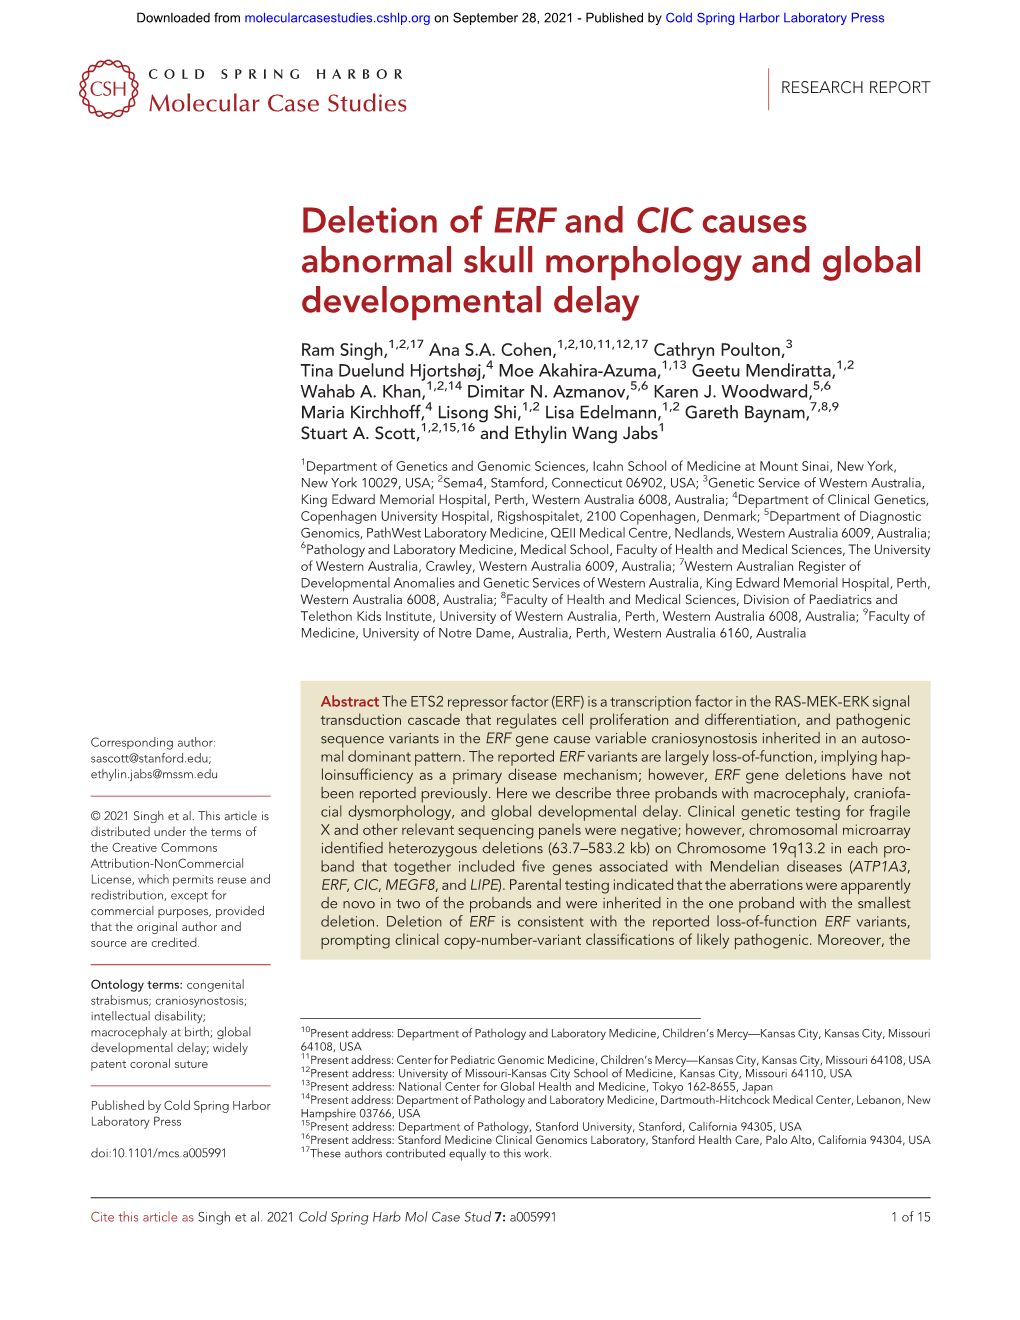 Deletion of ERF and CIC Causes Abnormal Skull Morphology and Global Developmental Delay